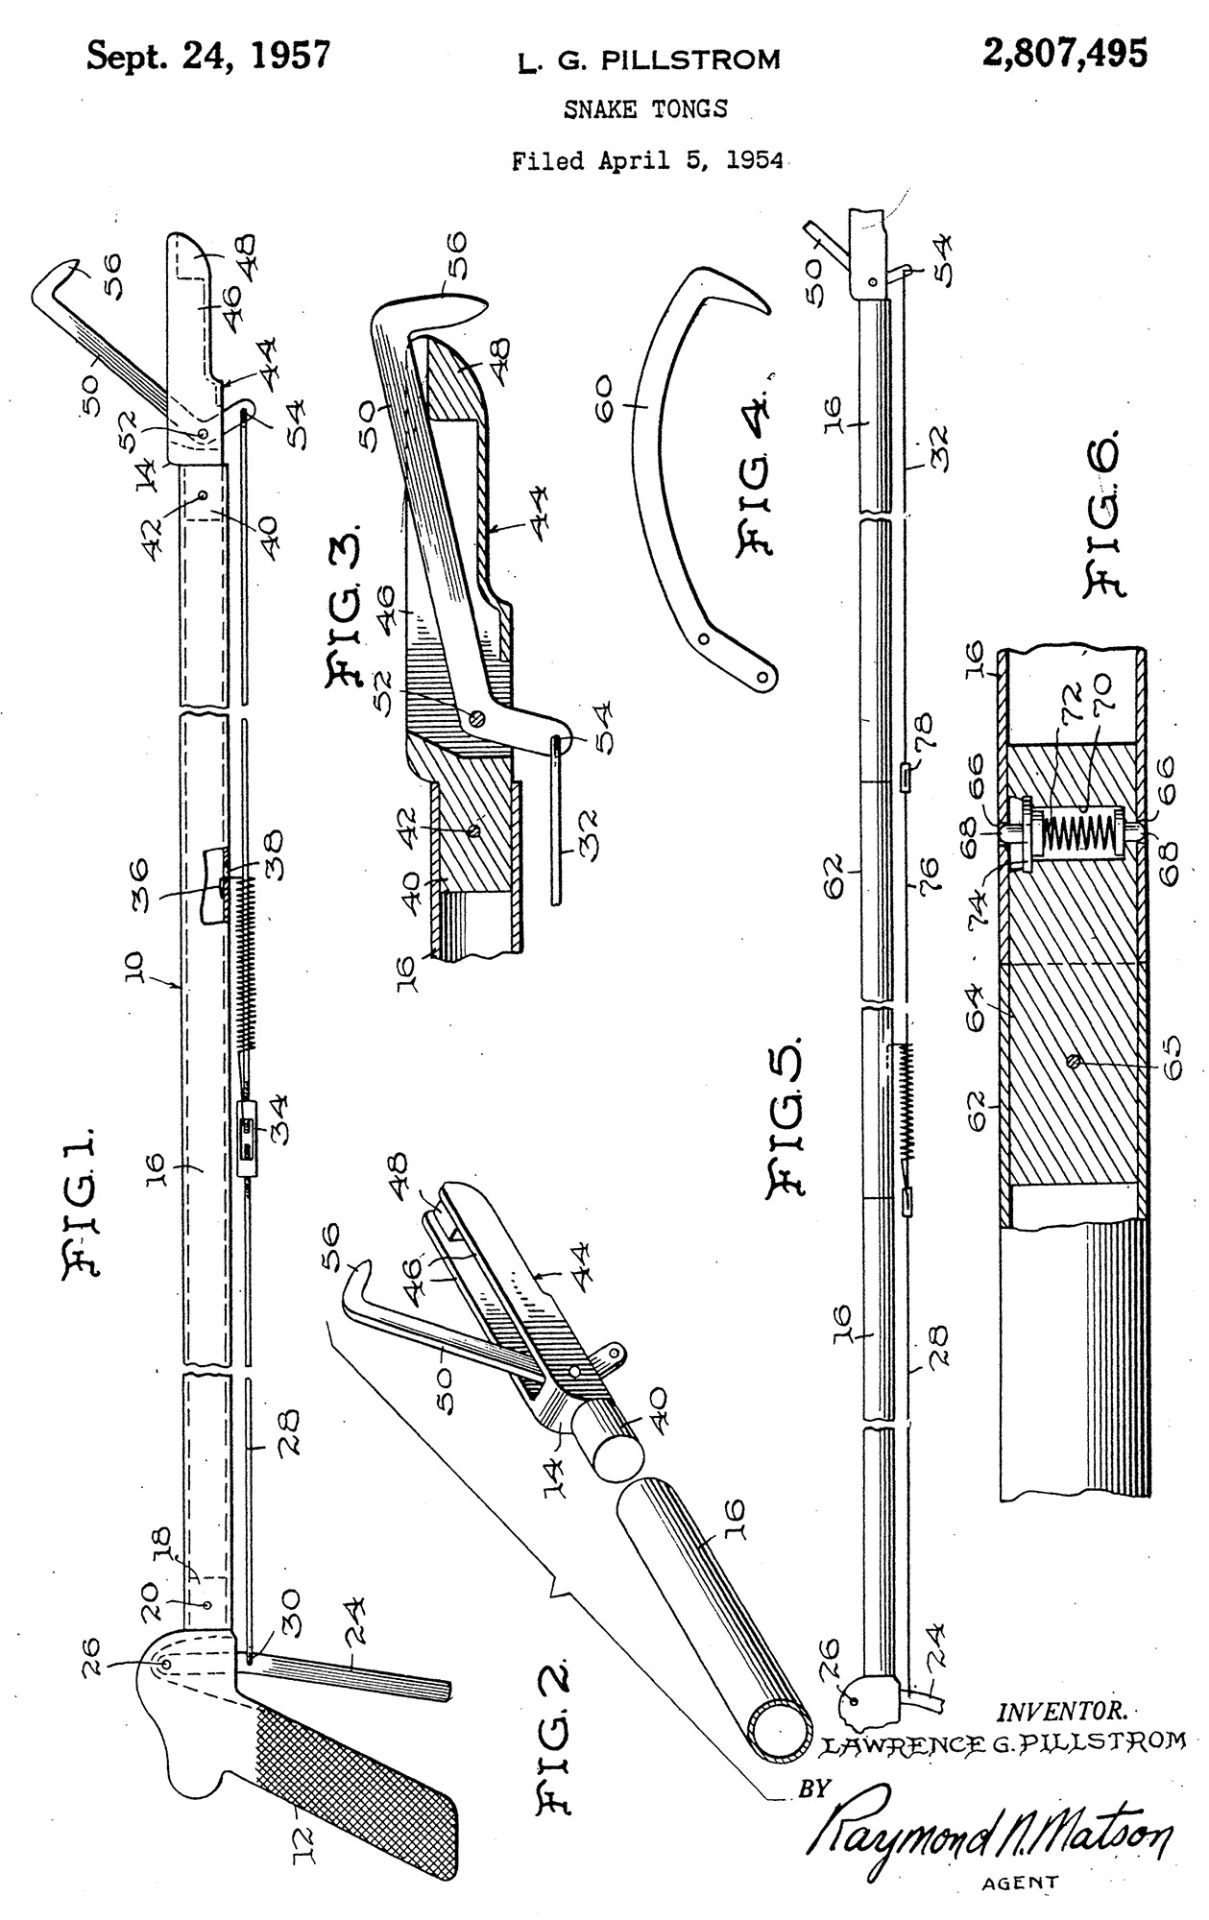 Patent drawings with date and numbered parts